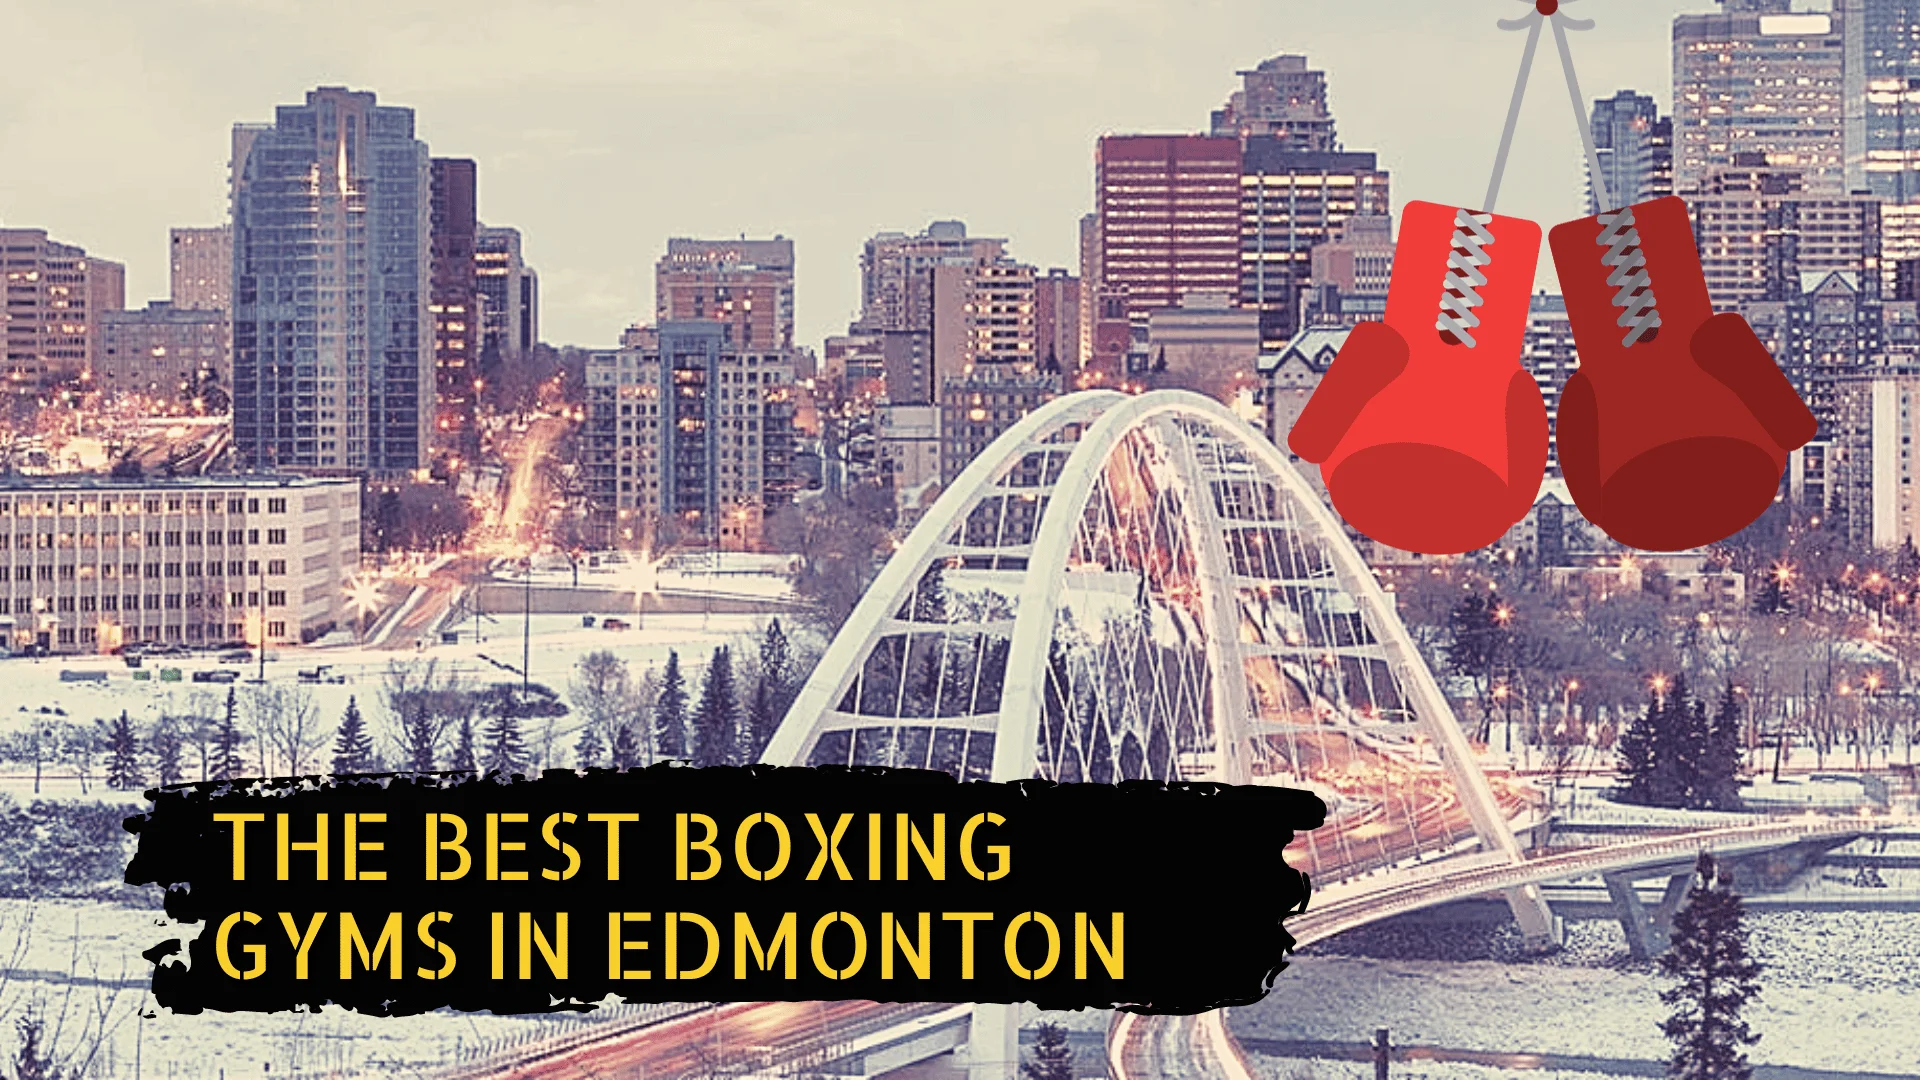 Edmonton skyline, some boxing gloves, and the title the best boxing gyms in Edmonton